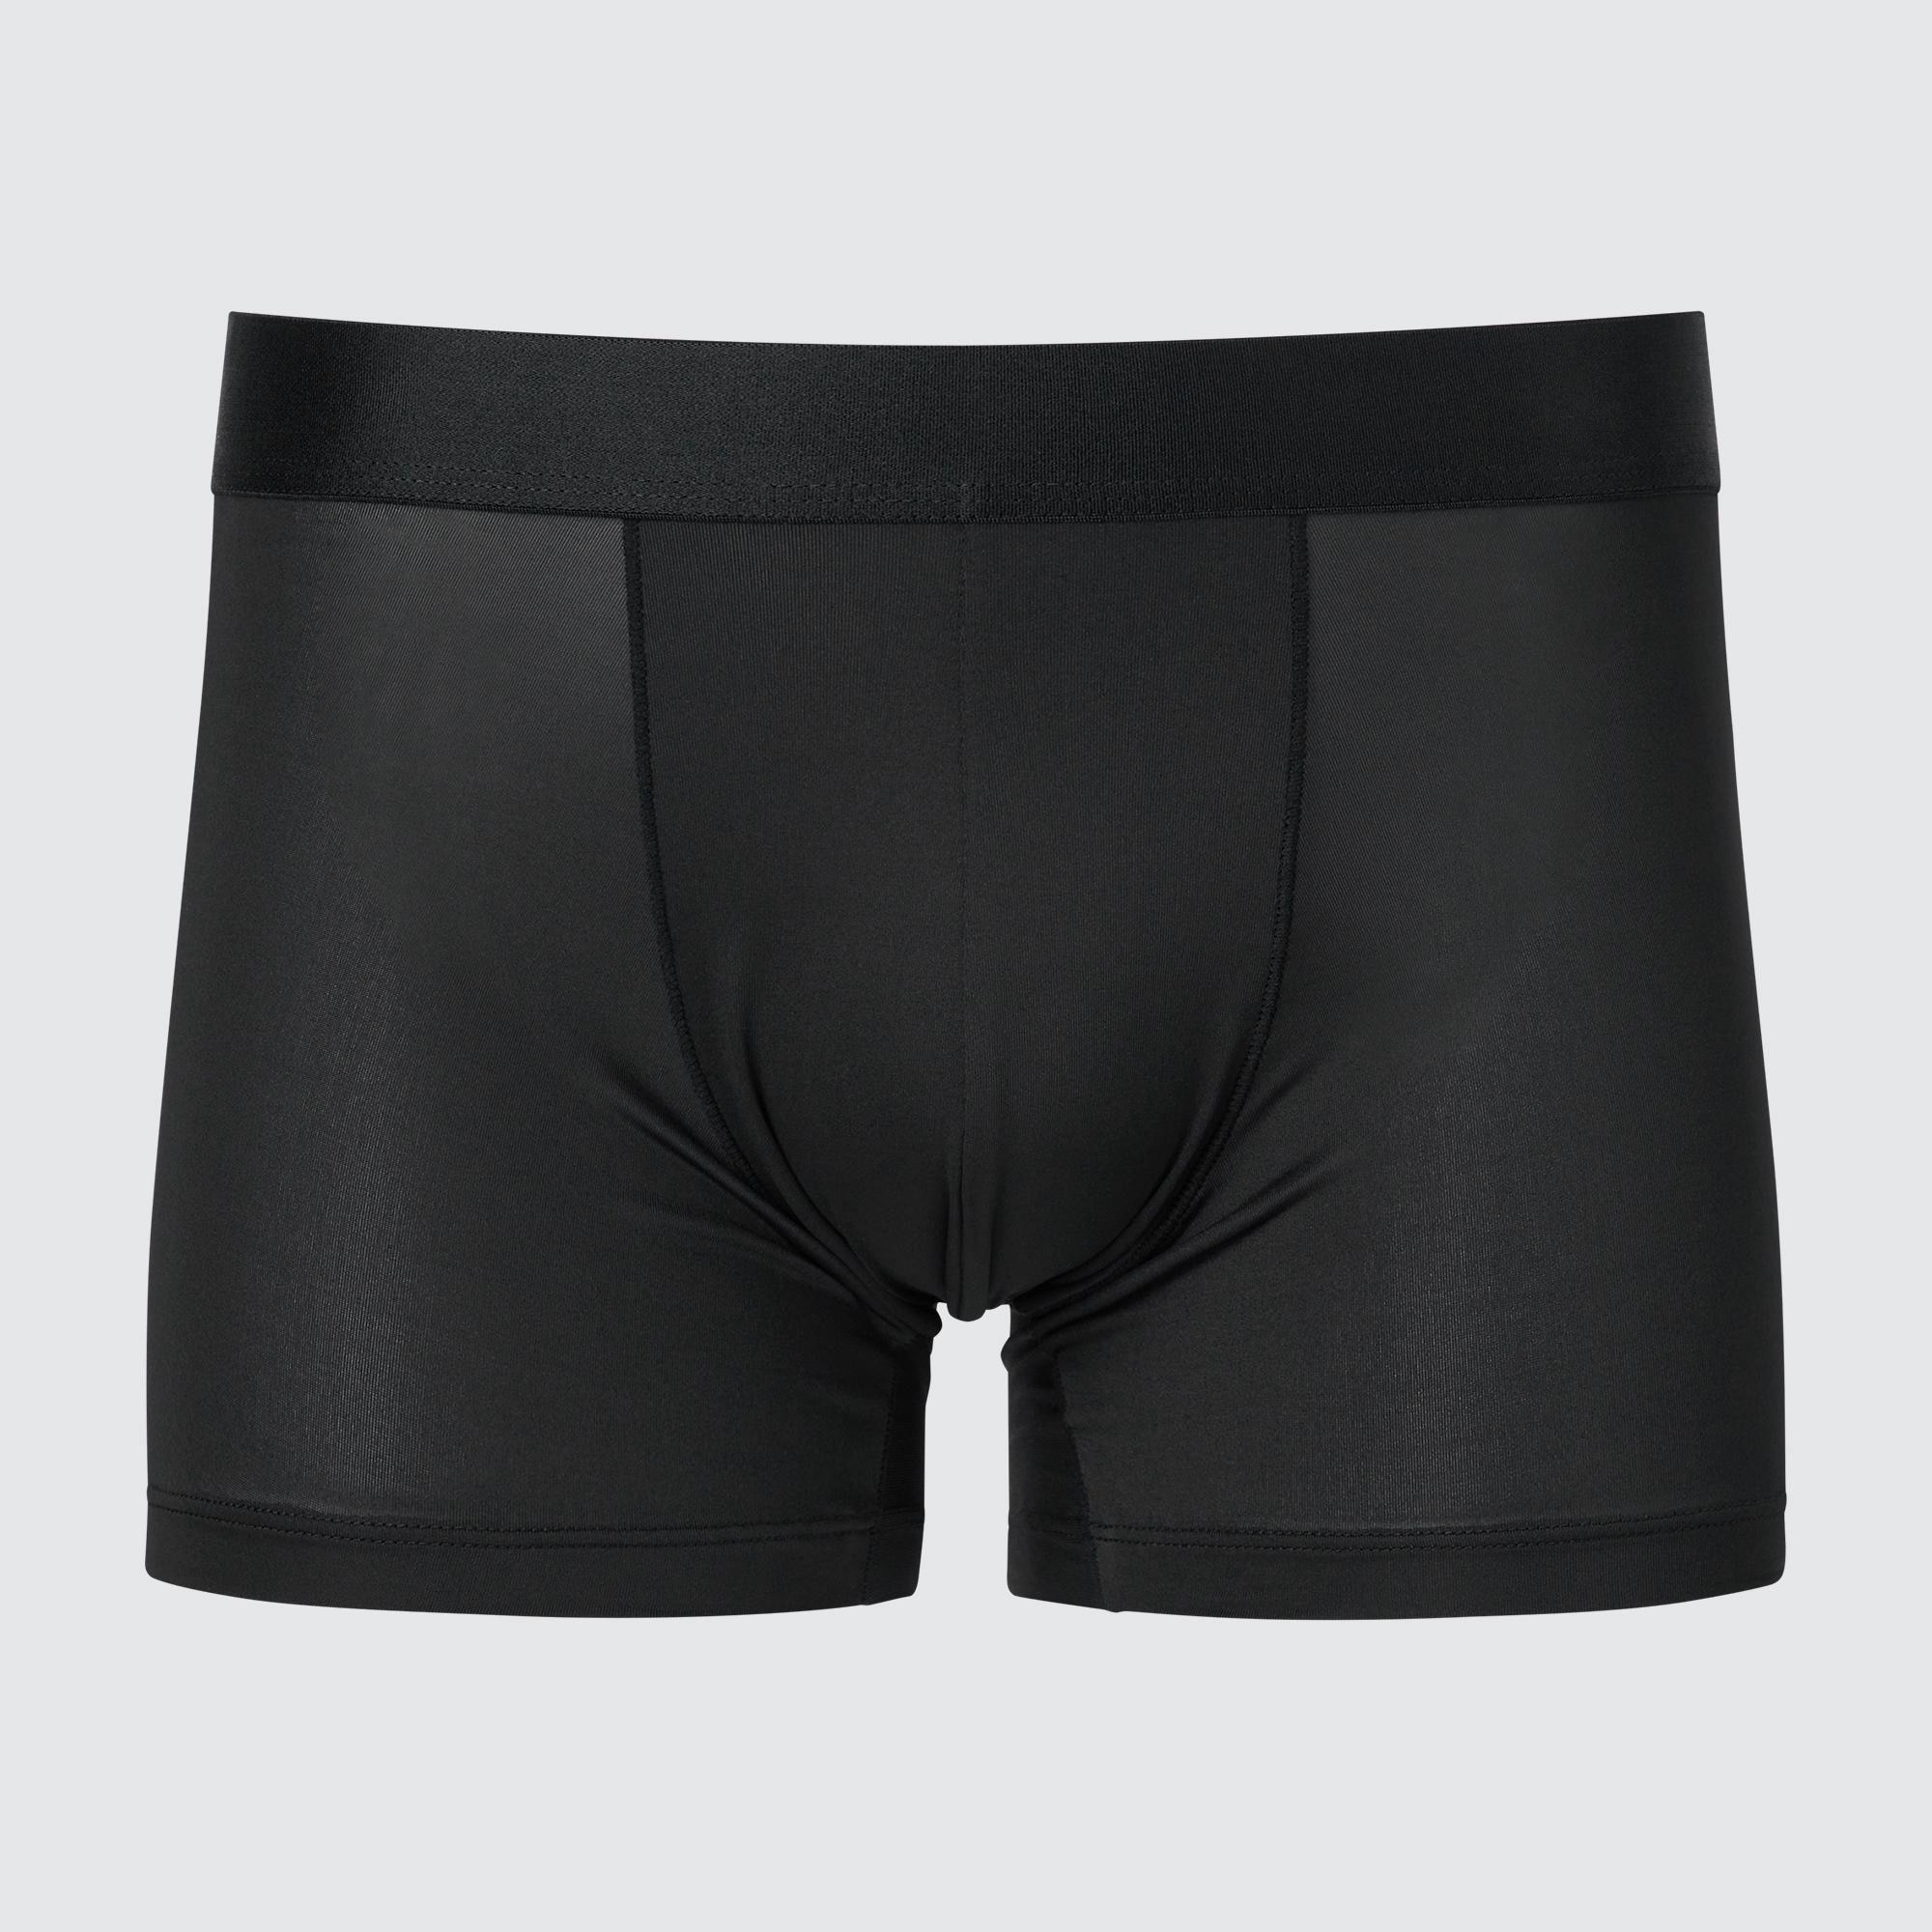 Uniqlo AIRism Ultra Seamless Absorbant Sanitary Shorts NEW